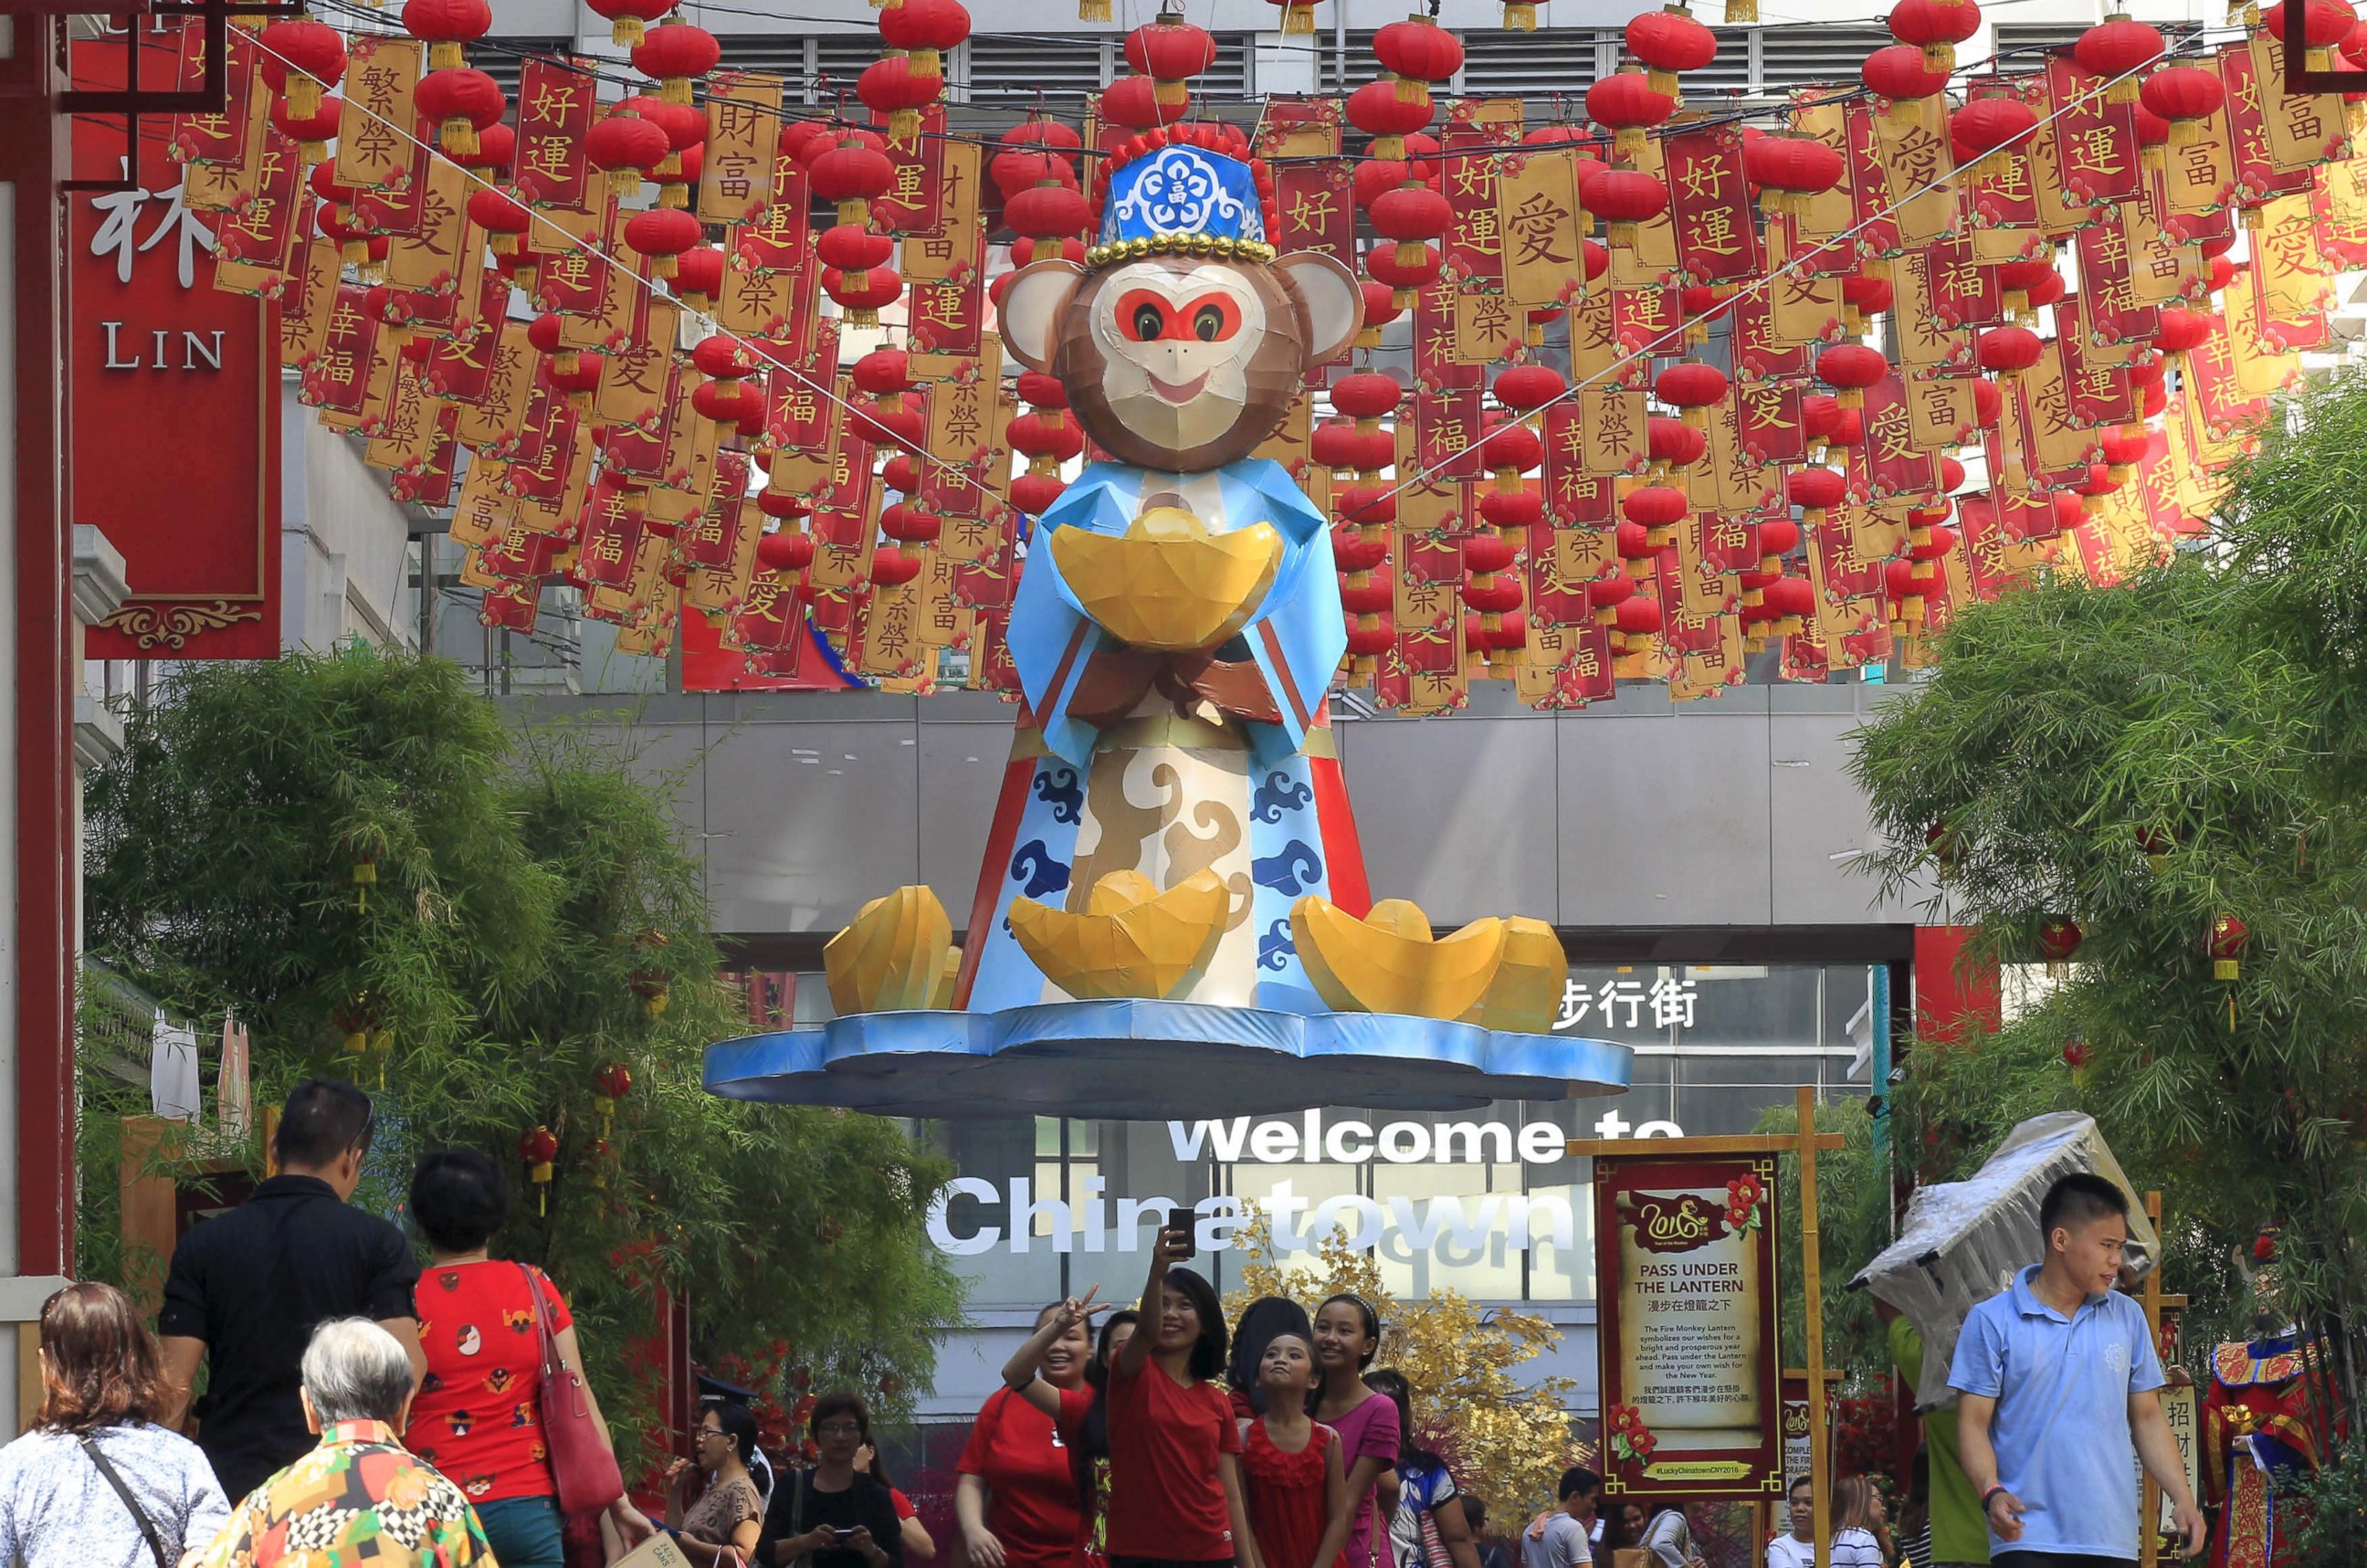 PHOTO: A giant wooden made monkey is seen as part of decorations in preparations for the coming Chinese New Year celebrations on Feb. 8, 2016 in Chinatown in Manila, Feb. 5, 2016. 